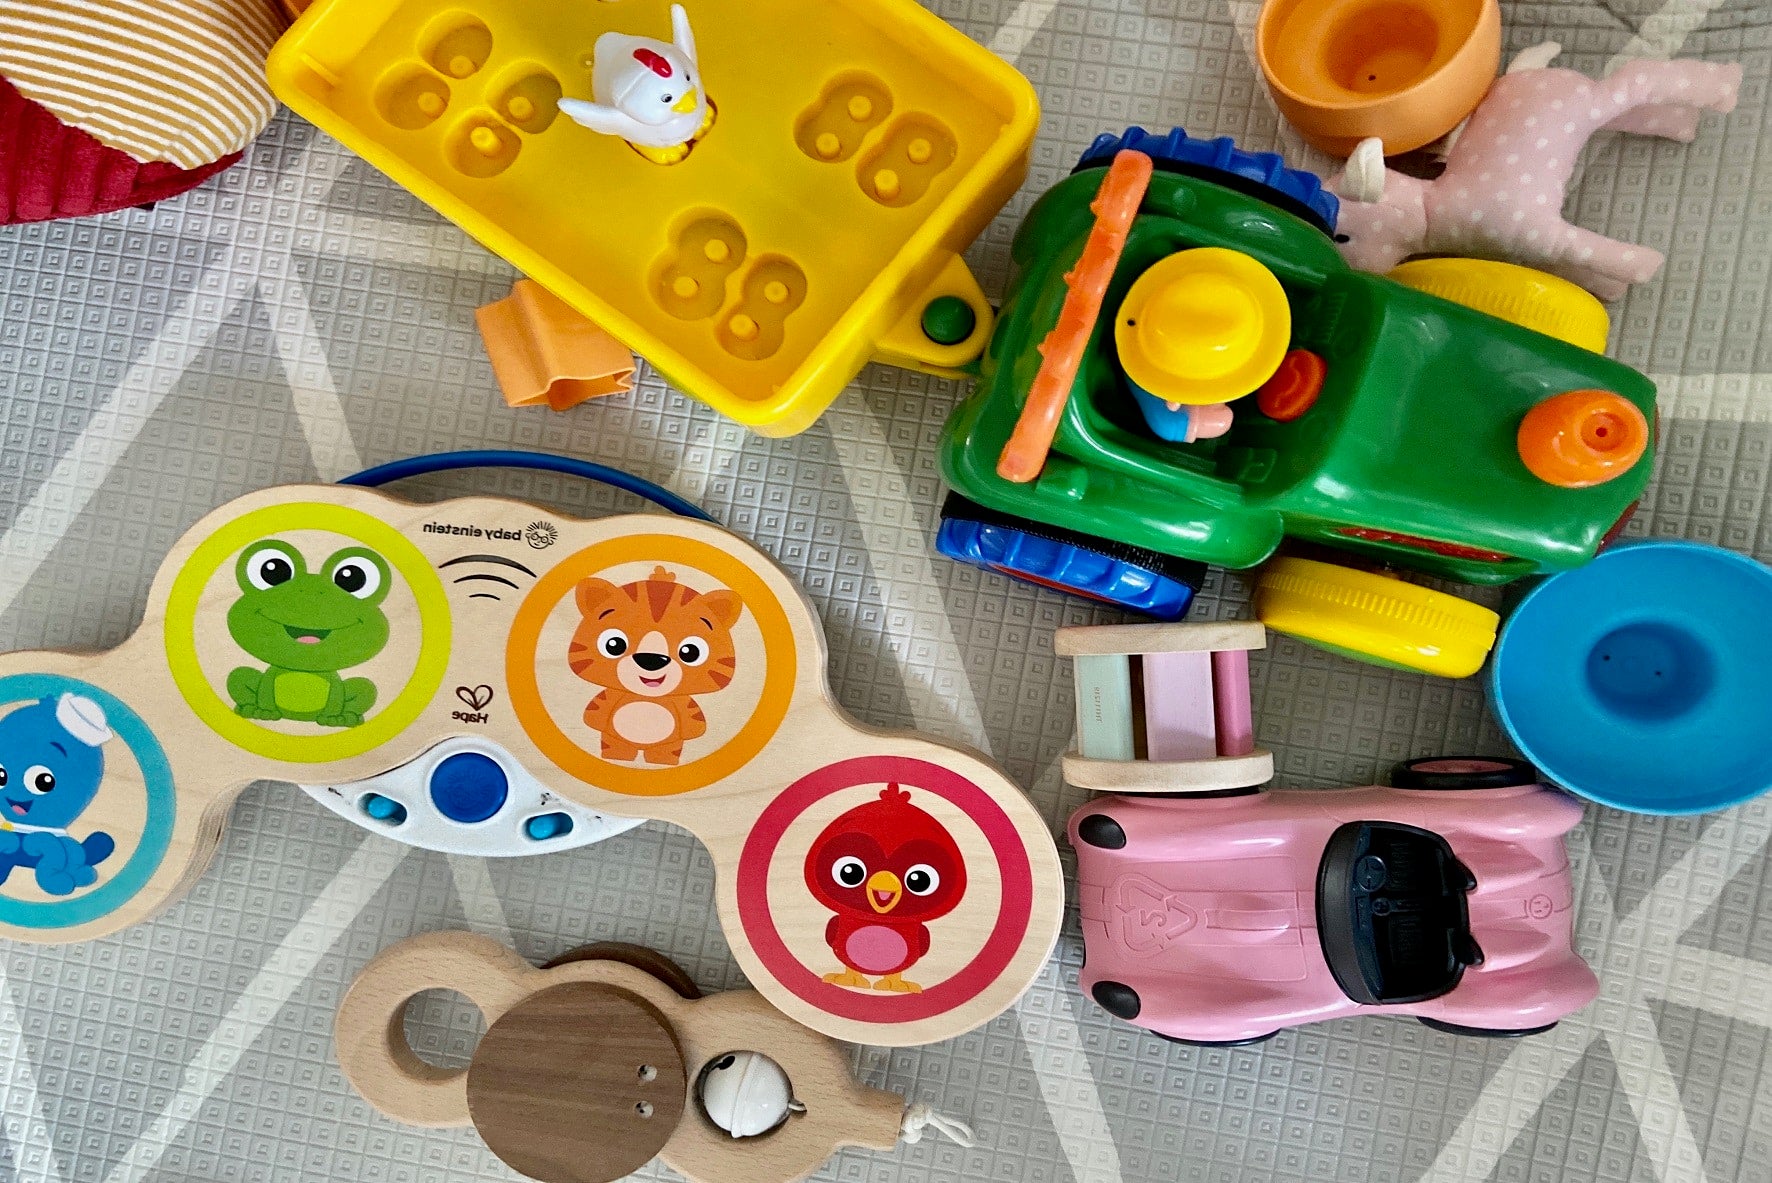 What to Do with Used Baby Items?